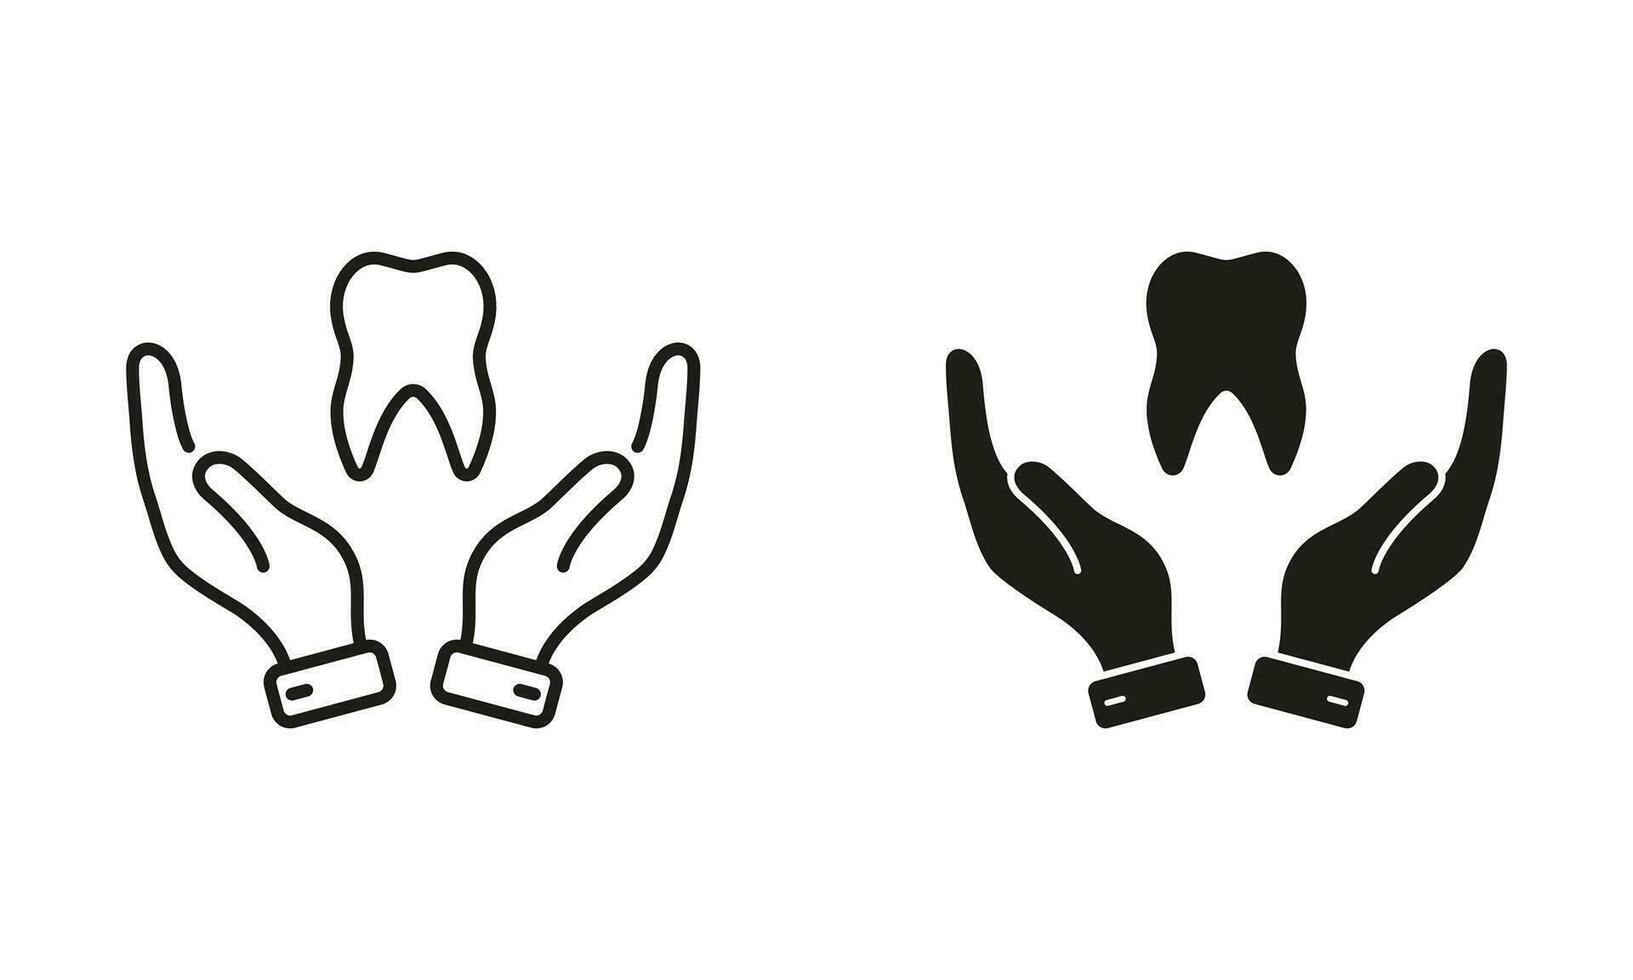 Dental Treatment Silhouette and Line Icons Set. Dentistry Black Symbol Collection. Dental Care, Stomatology Protection Sign. Tooth and Human Hand Pictogram. Isolated Vector Illustration.